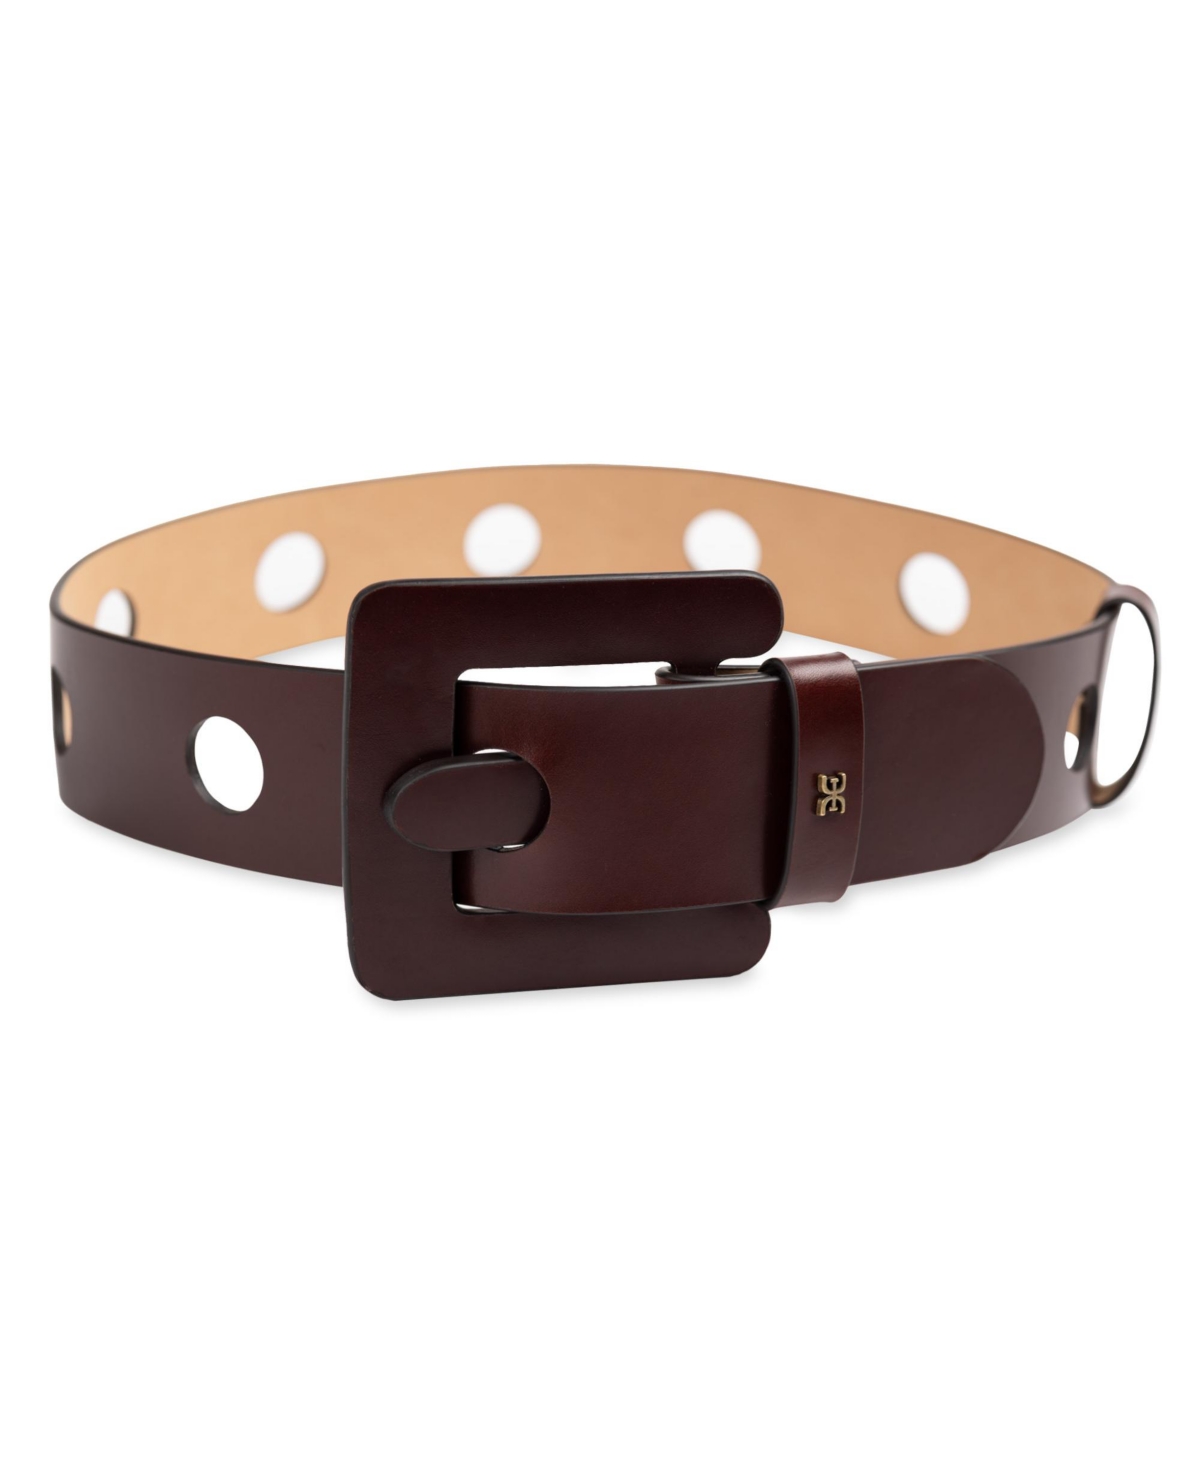 Sam Edelman Women's Perforated Leather Belt With Leather Covered Buckle In Brown